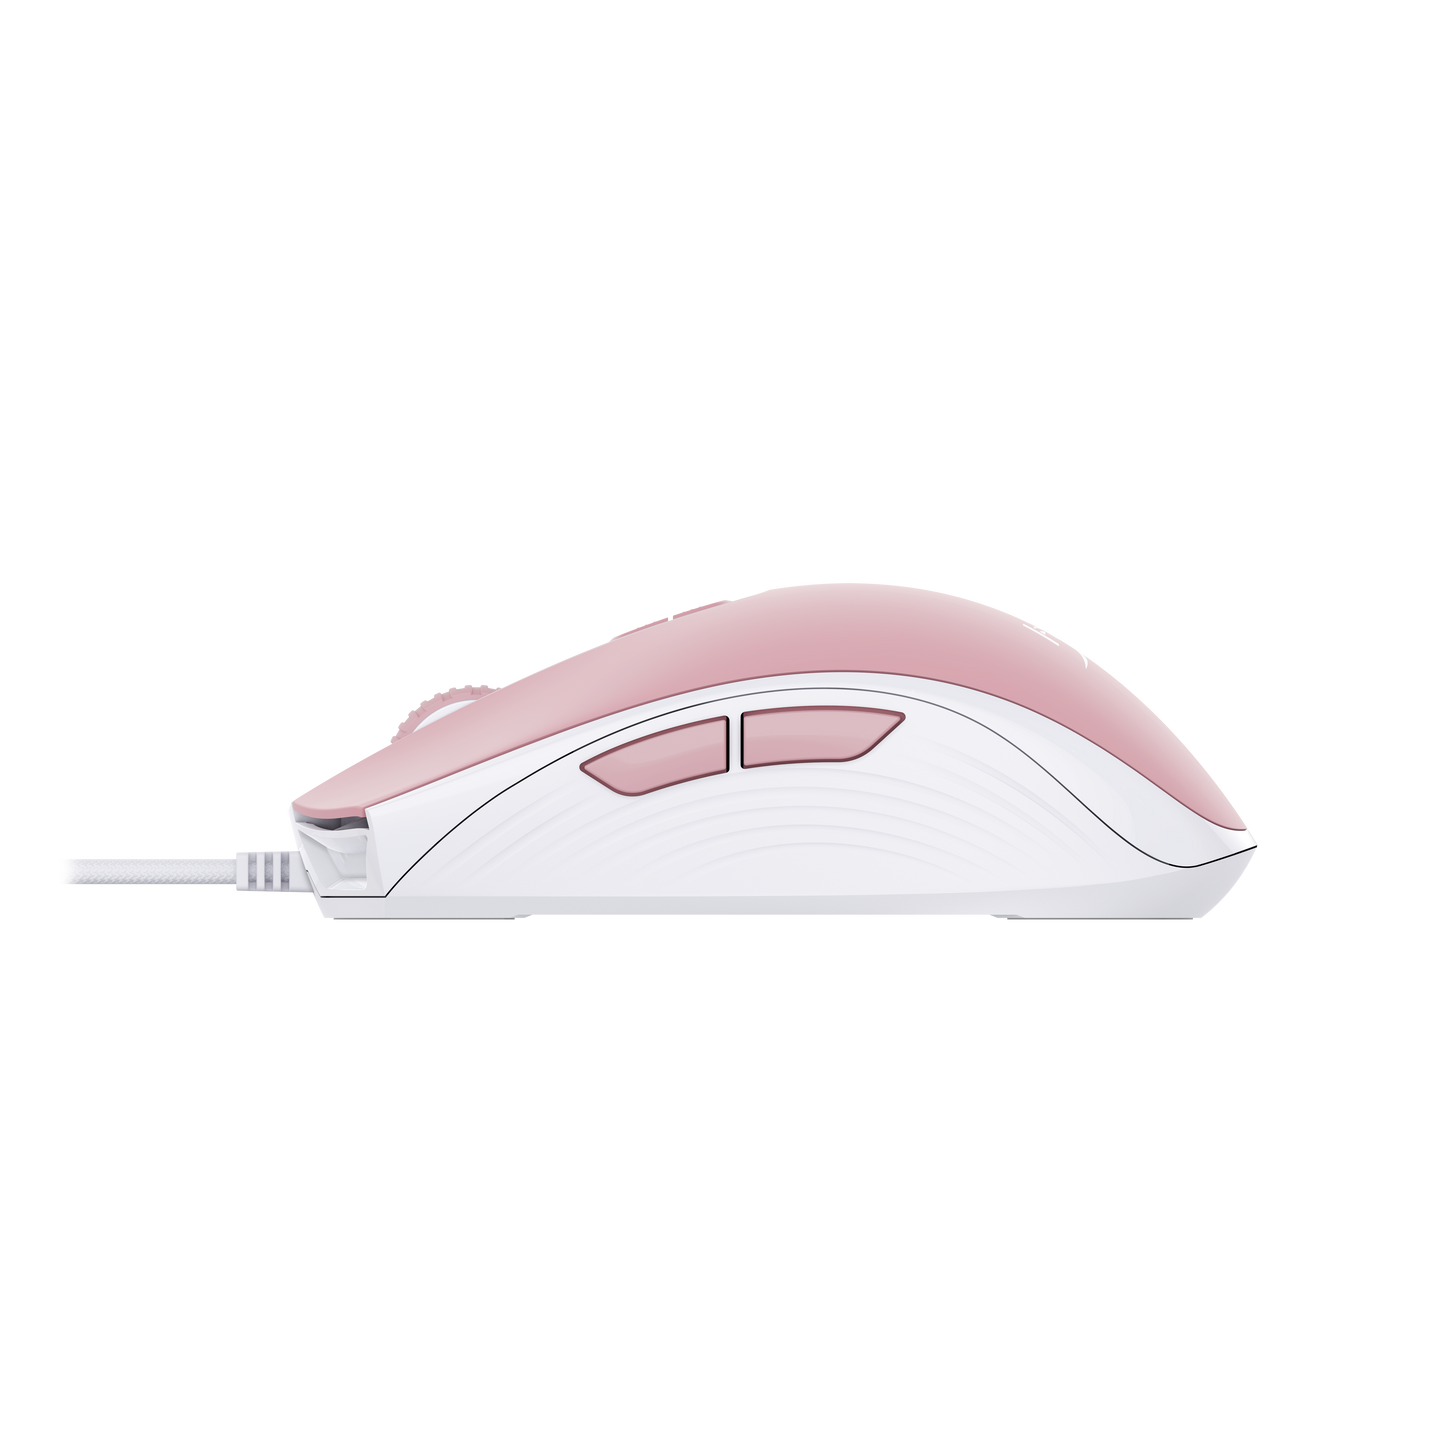 HYPERX PULSEFIRE CORE RGB GAMING MOUSE (Pink/White)